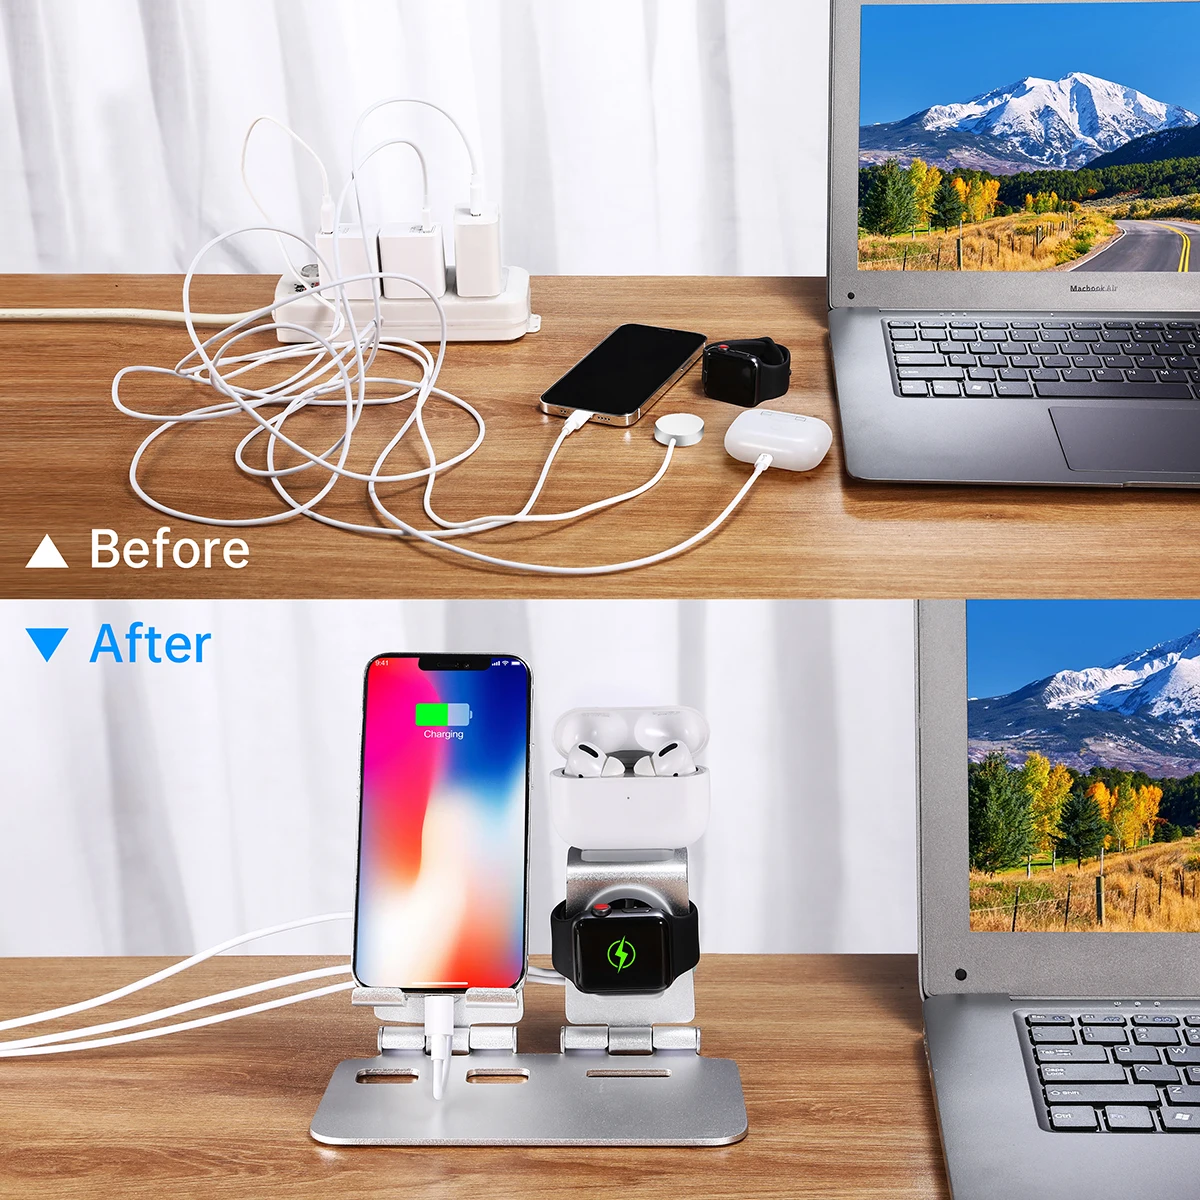 3 in 1 alloy desktop phone charge dock holder for airpods 12 pro apple iwatch for all iphone ipad android tablet charging stand free global shipping